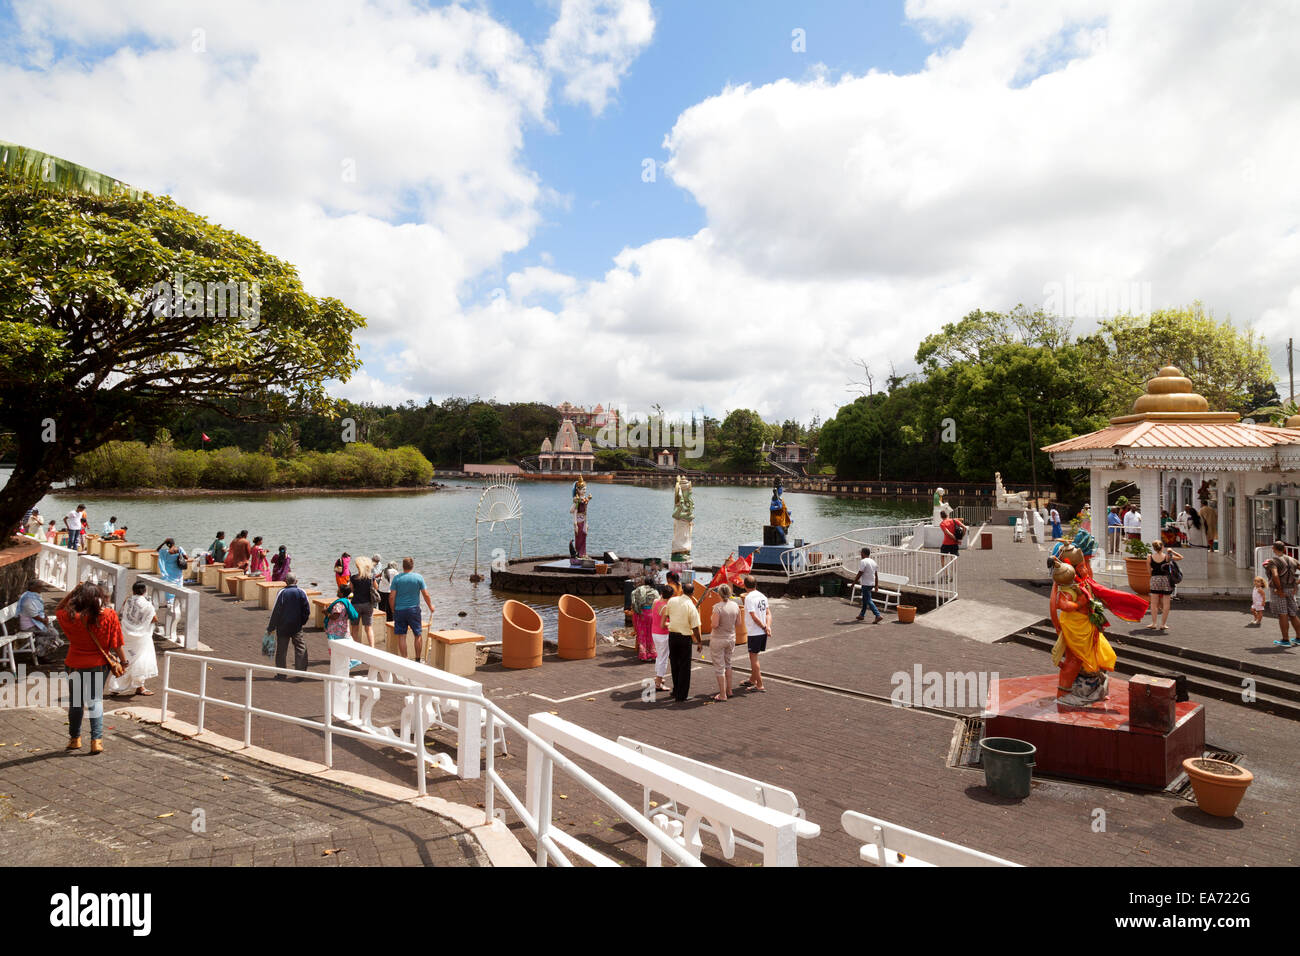 The Hindu temple at Grand Bassin lake (also known as Ganga Talao or Ganges Lake ), central Mauritius Stock Photo